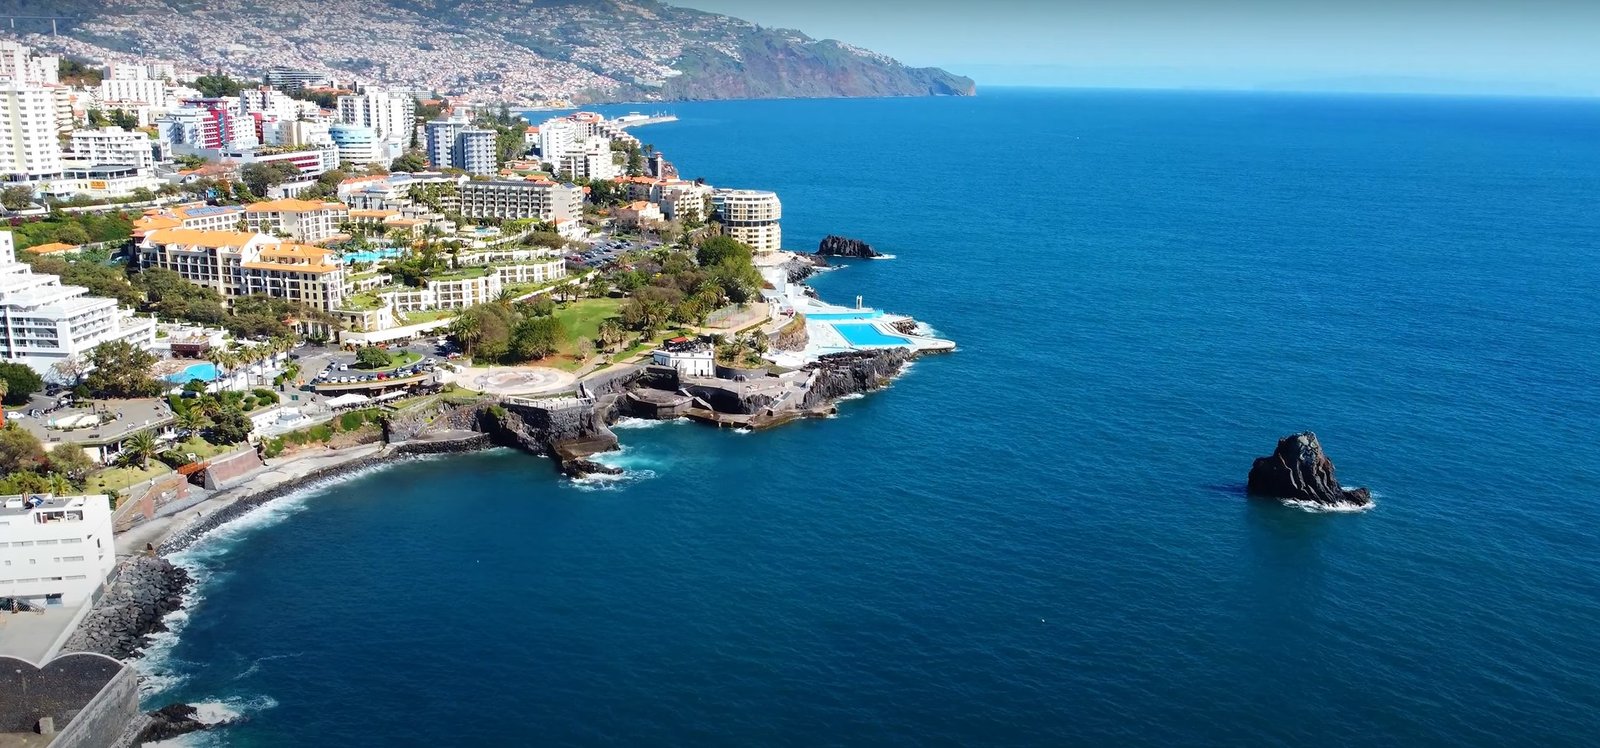 Fantastic images by drone from the Amazing Funchal beaches